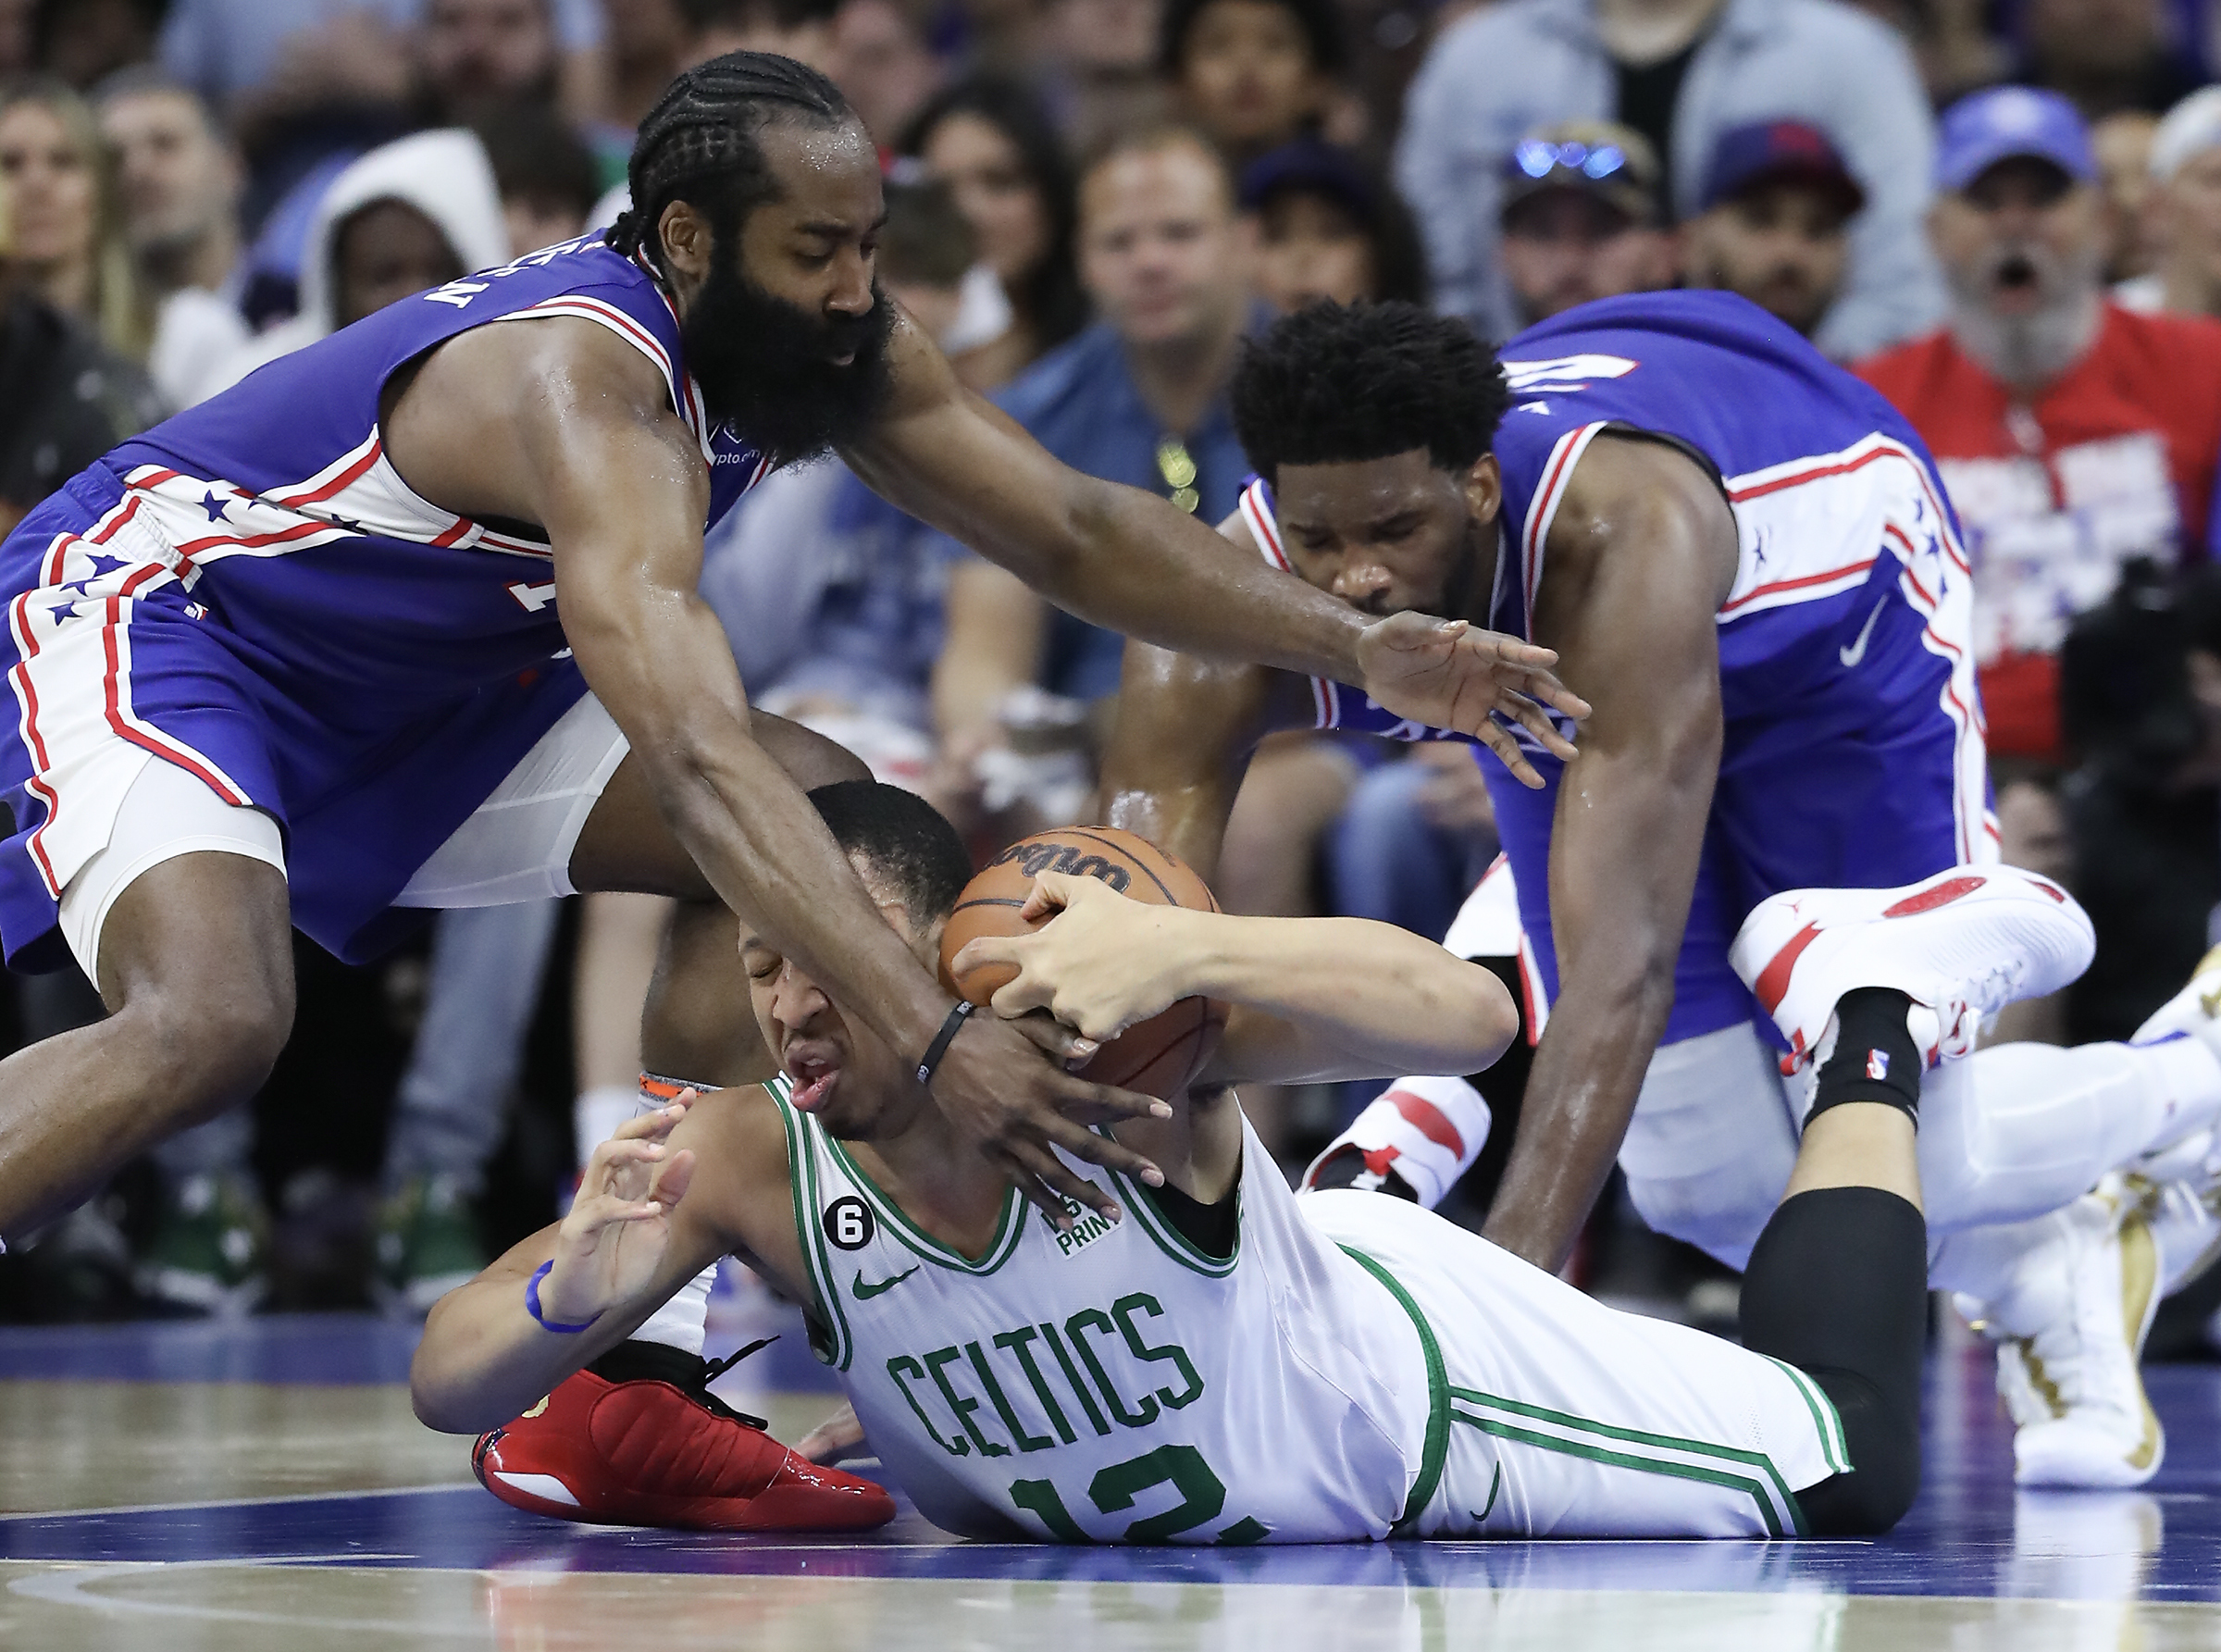 NBA playoffs: James Harden has his moment in Joel Embiid's absence, leads  76ers to Game 1 win